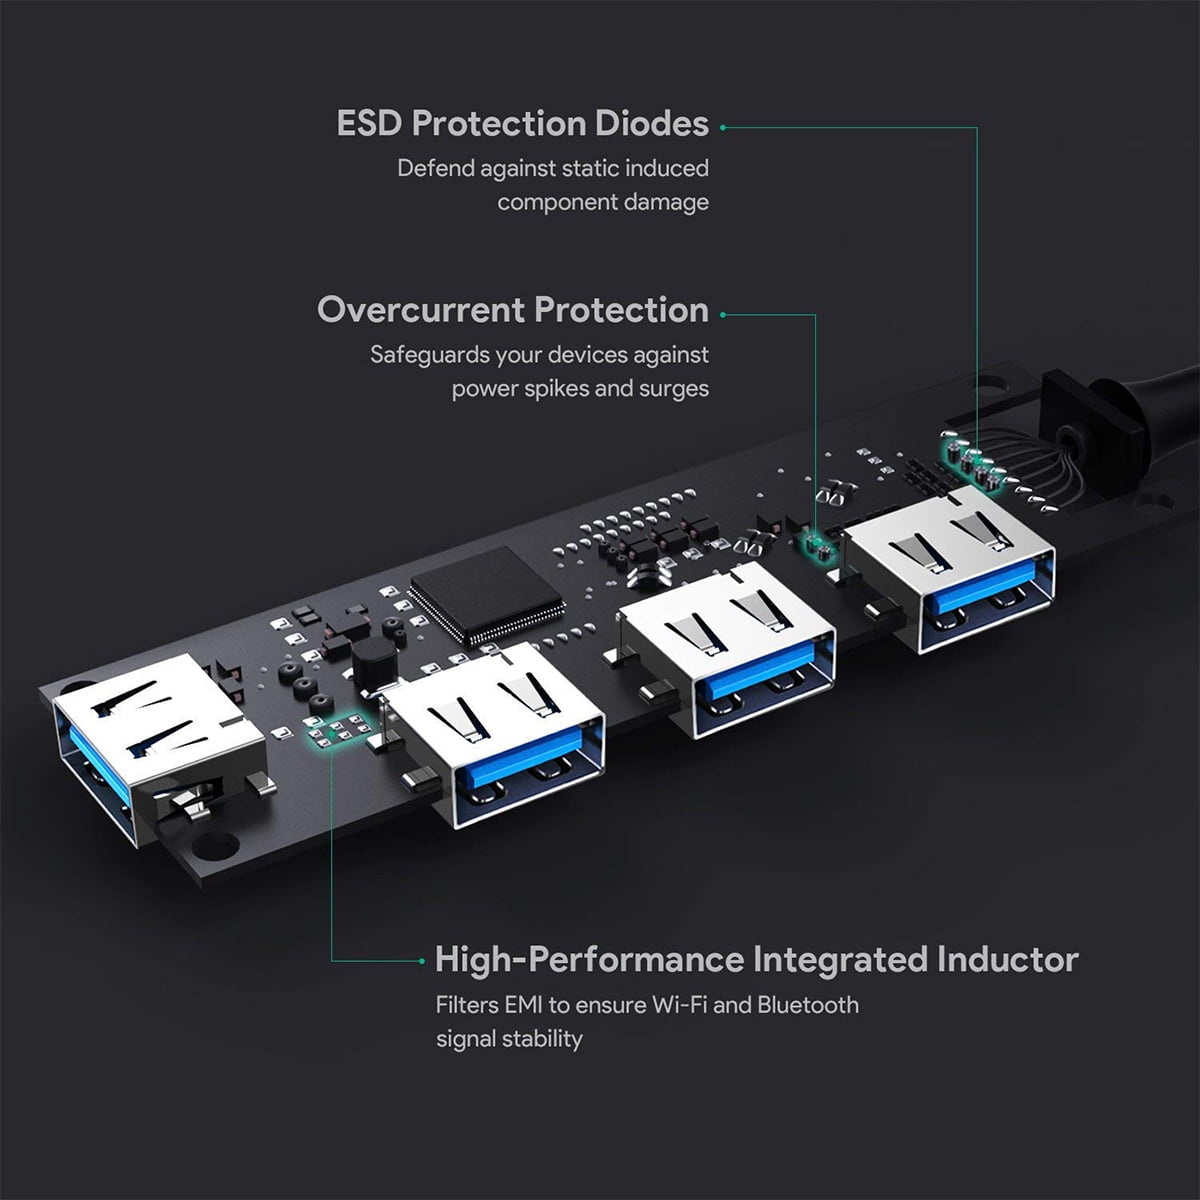 ESD Protection Diodes Defend against static induced component damage )vercurrent Protection Safeguards your devices against power spikes and surges